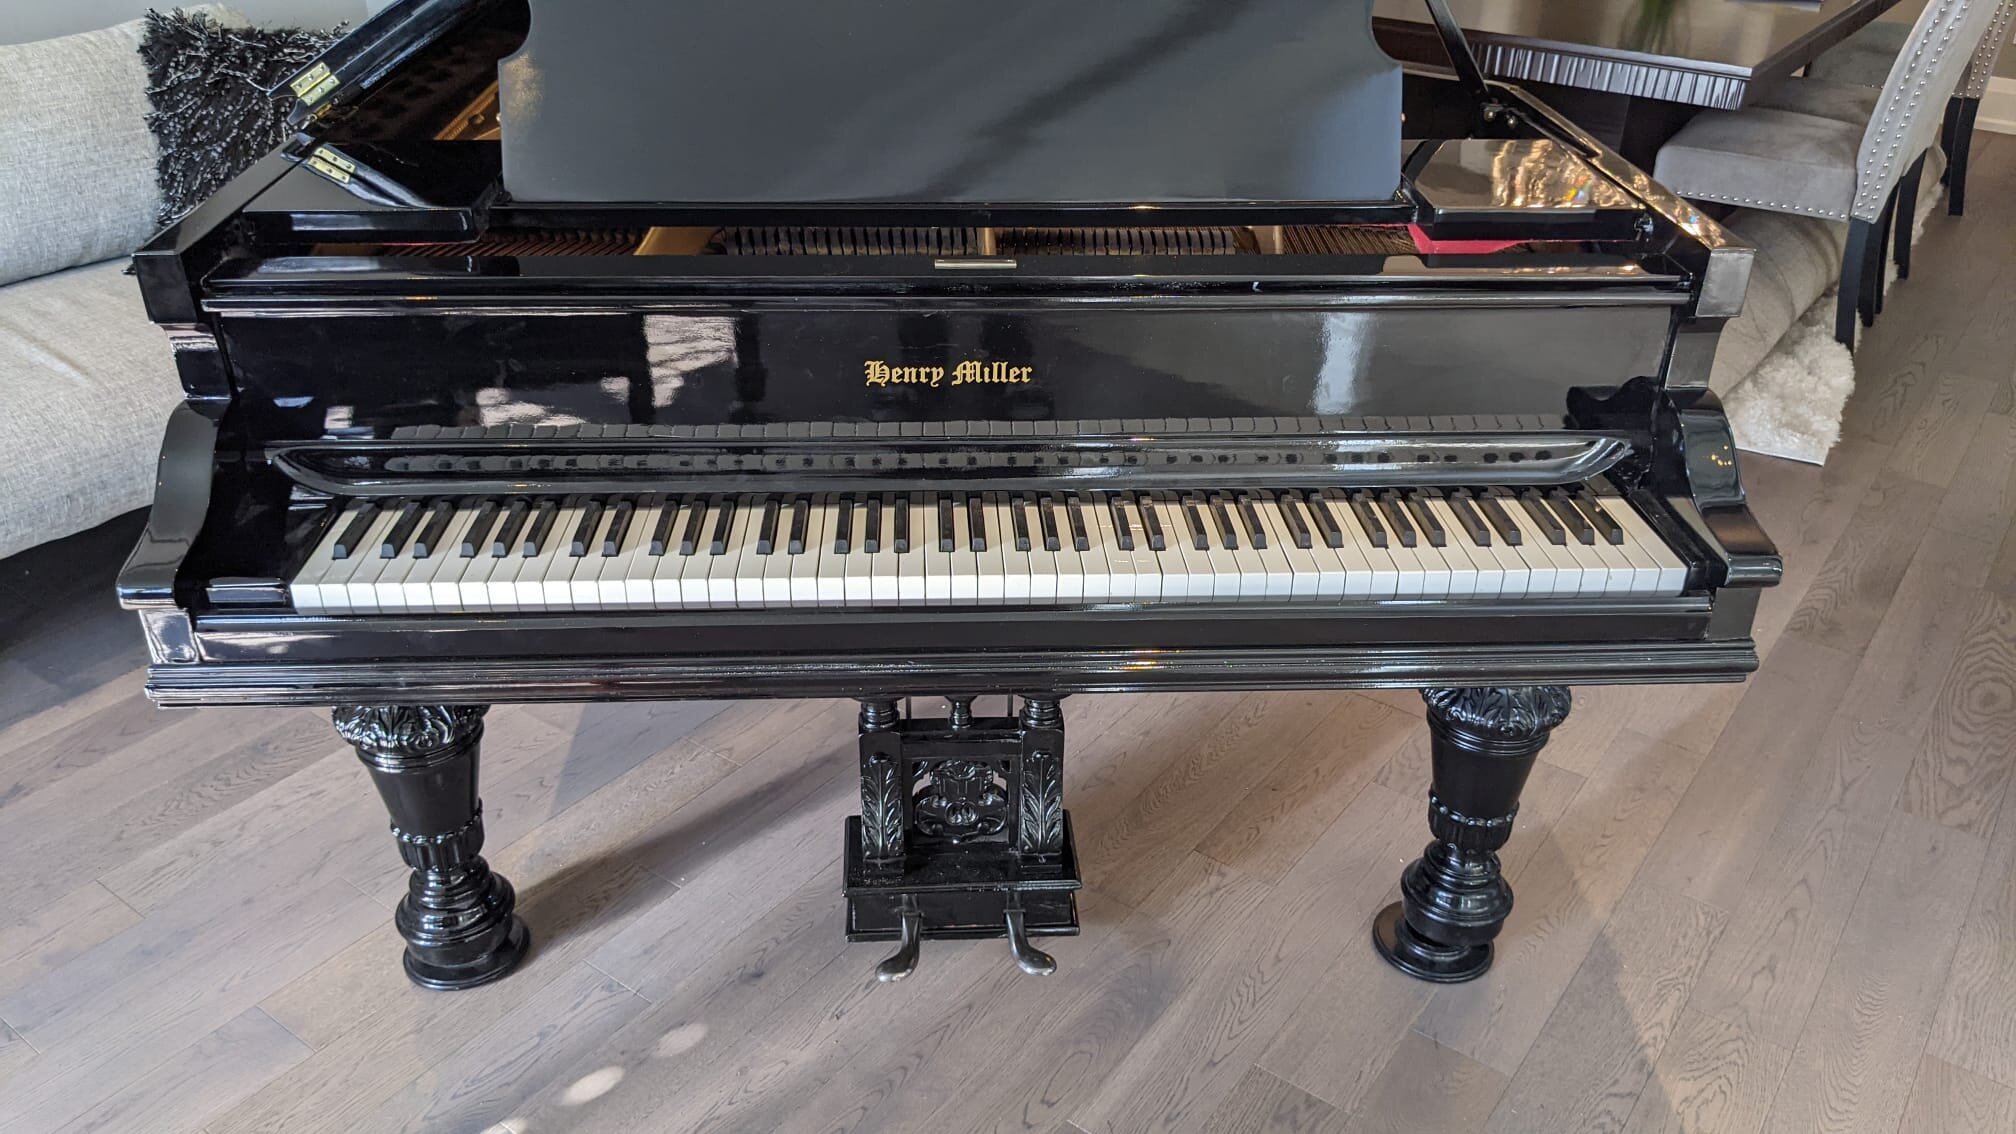 Henry Miller piano for sale7.jpeg